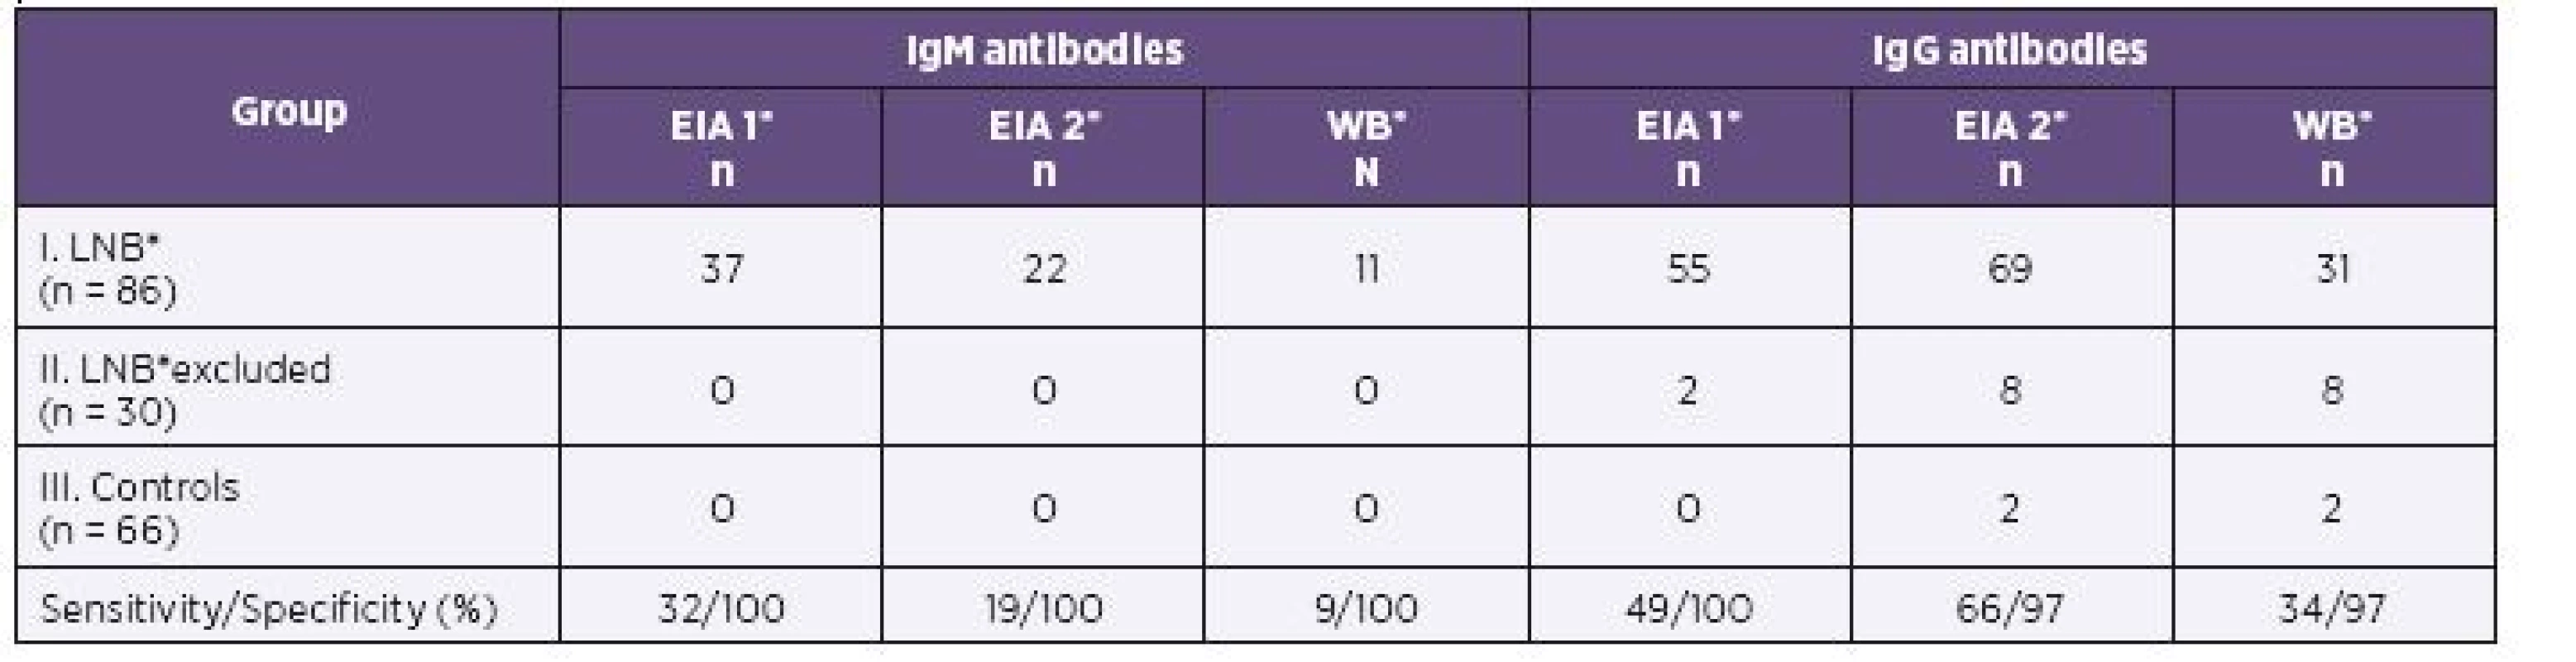 Cerebrospinal Fluid Samples of 182 Children: Comparison of Positive Antibody Response by Two EIA Tests and Western Blot